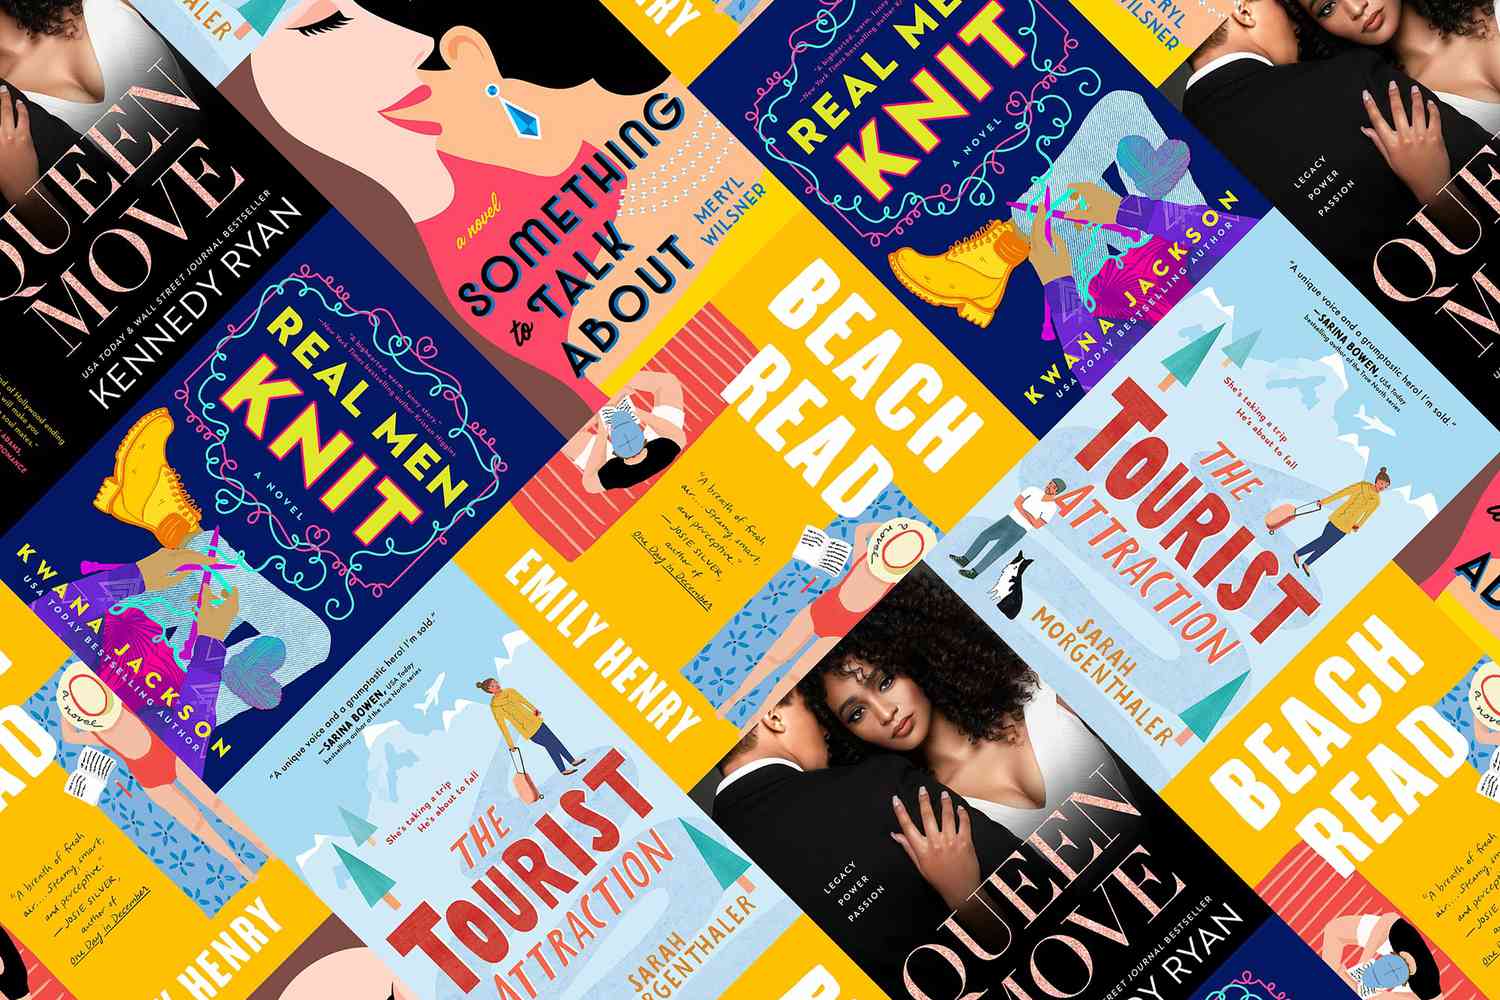 10 Romantic Books to Make Your Heart Skip a Beat